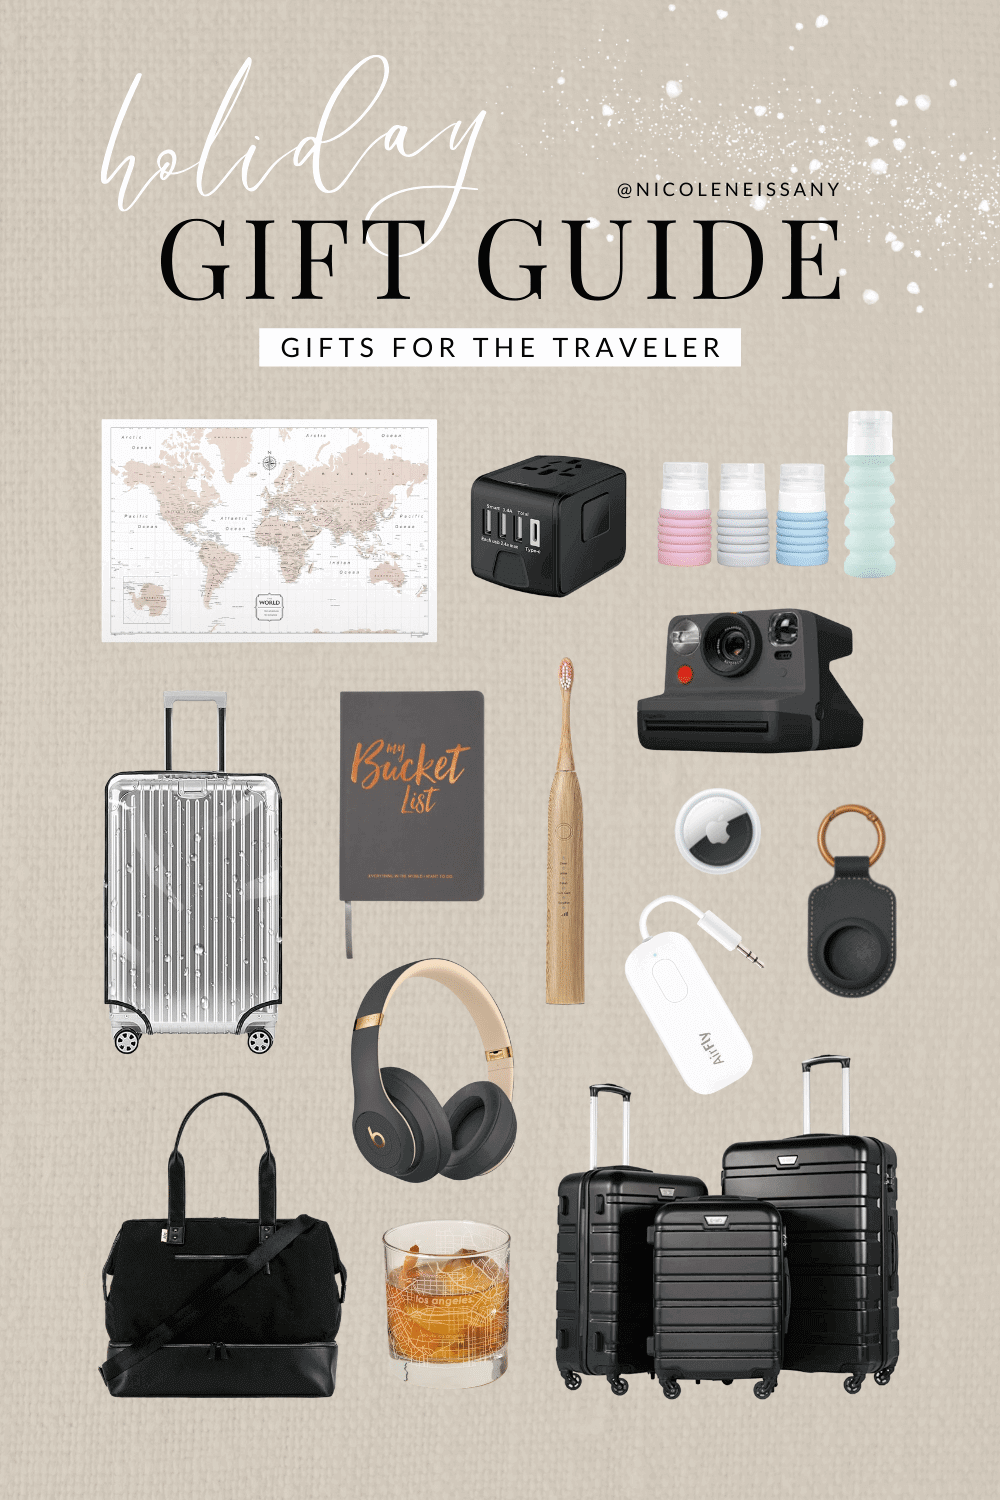 2022 Holiday Gift Guide for Her - Inspiralized